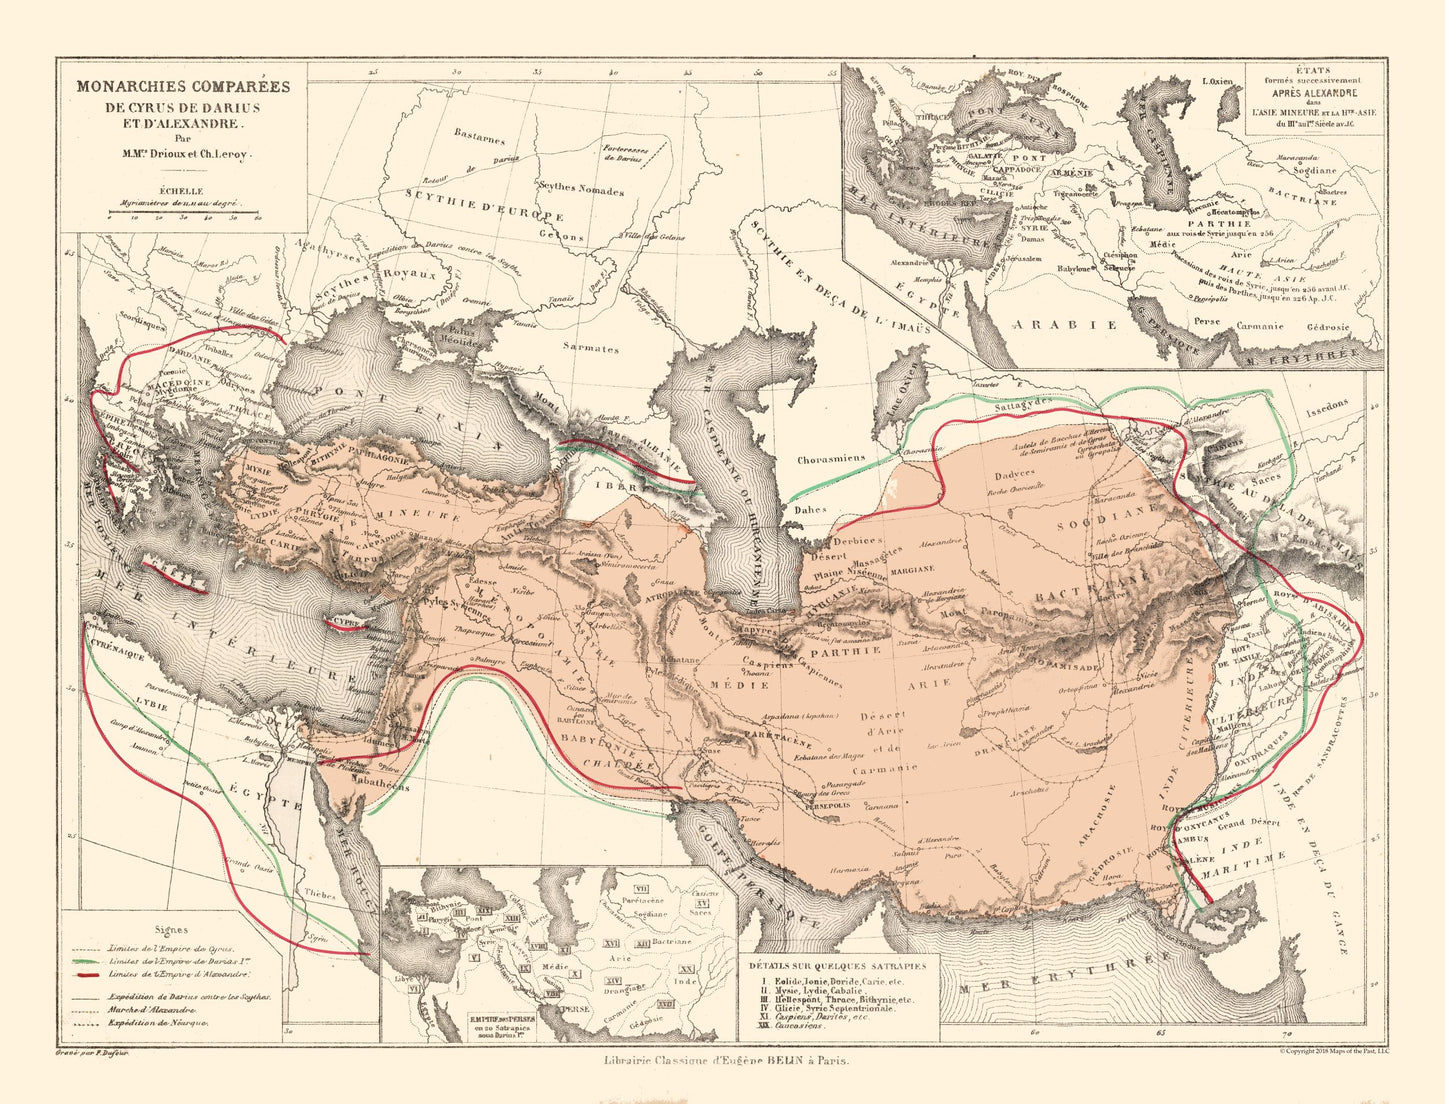 Historic Map - Middle East Dynasty Comparisons - Drioux 1882 - 30.10 x 23 - Vintage Wall Art